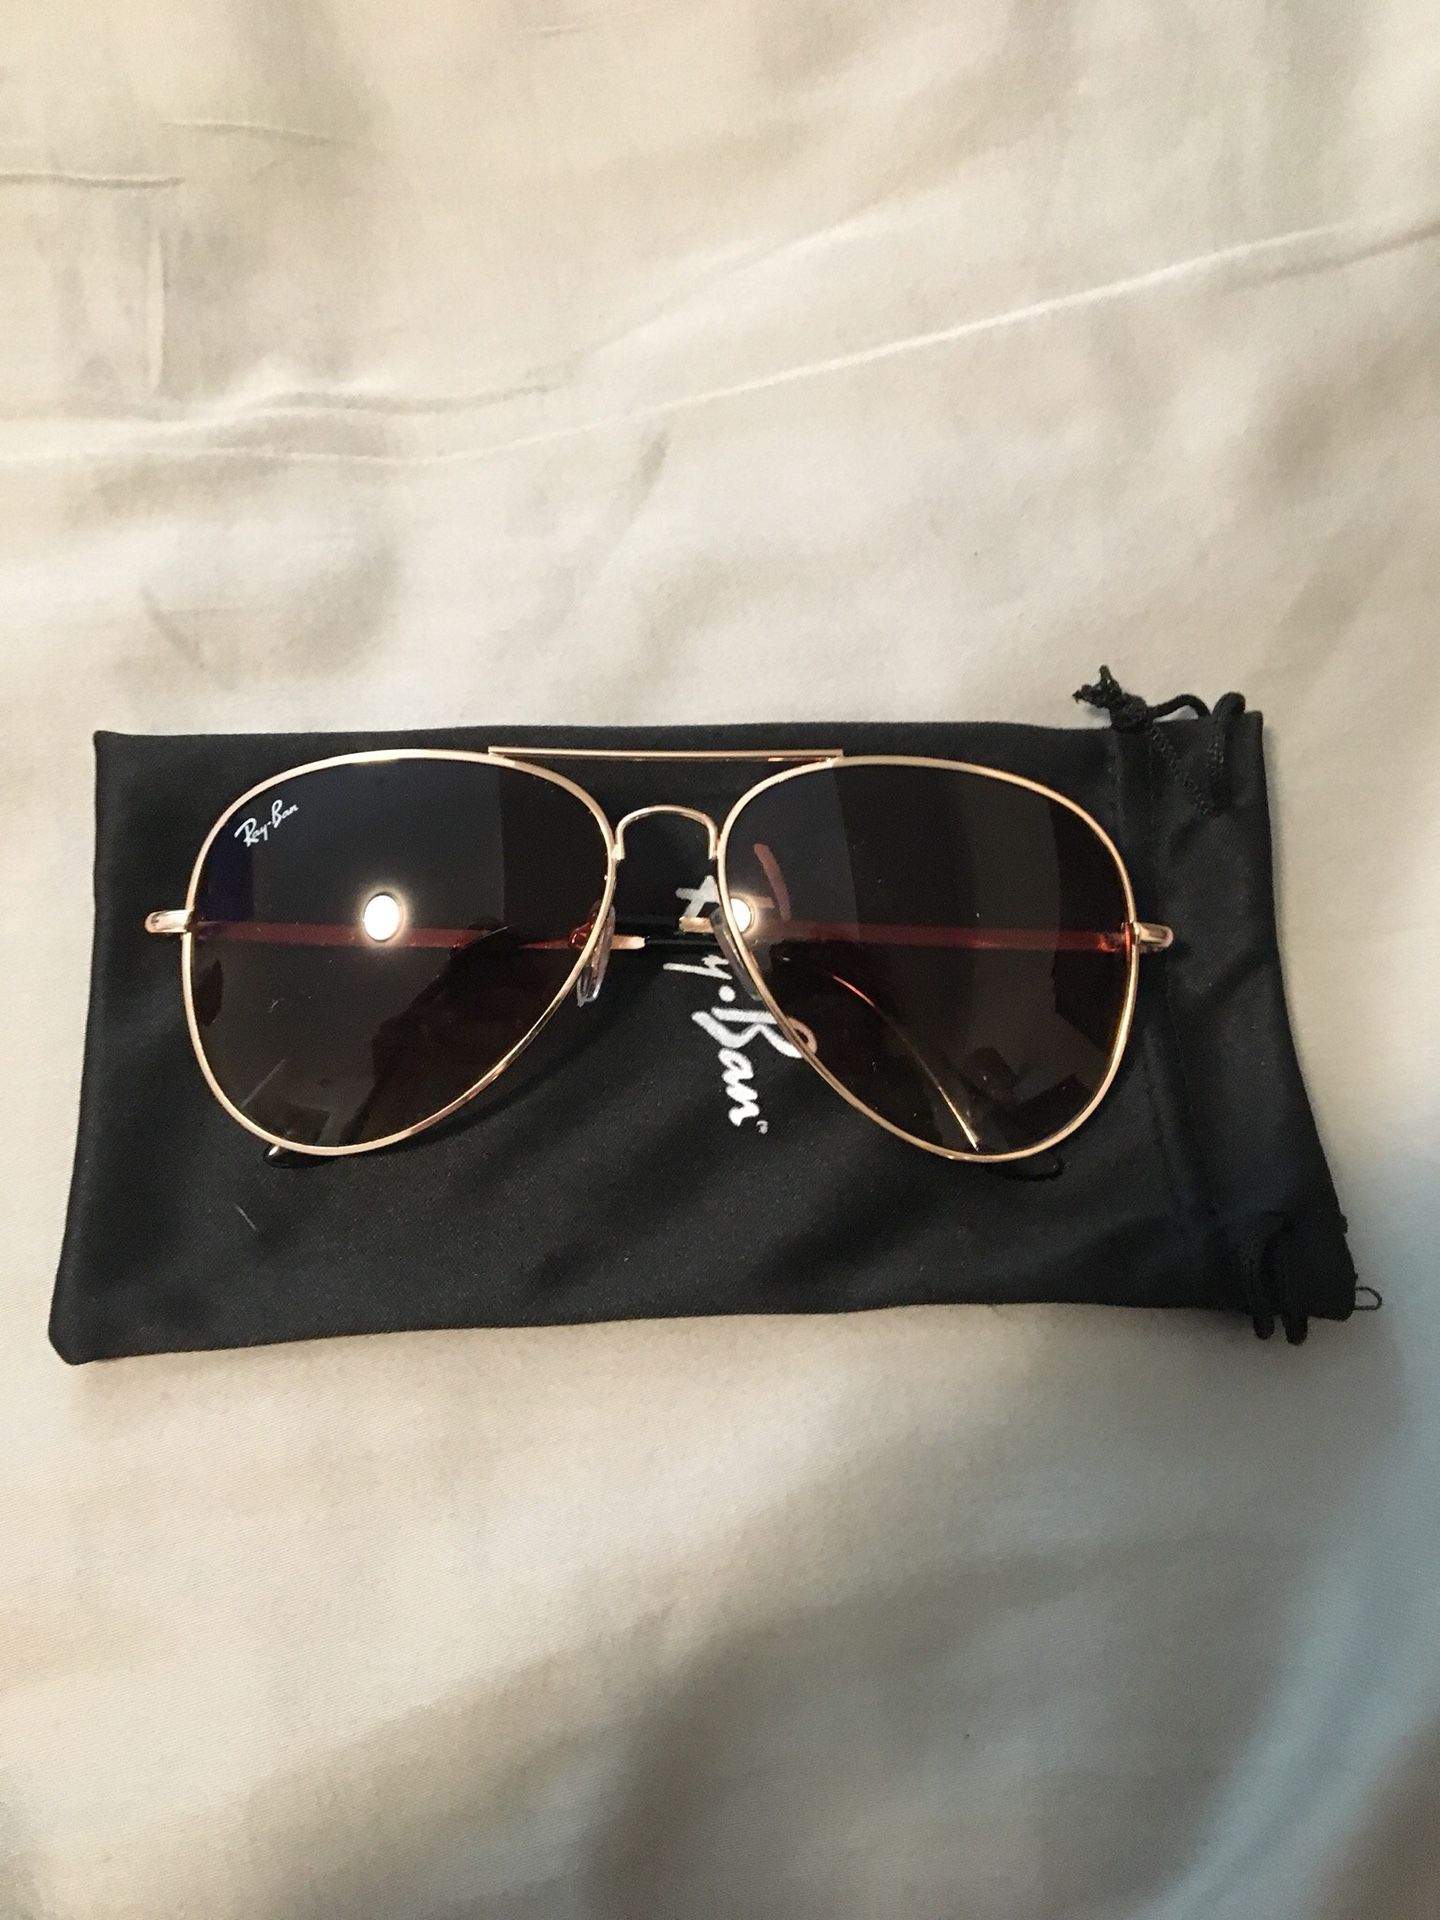 New Ray Ban Aviator sunglasses with Gold Frame and Brown lenses